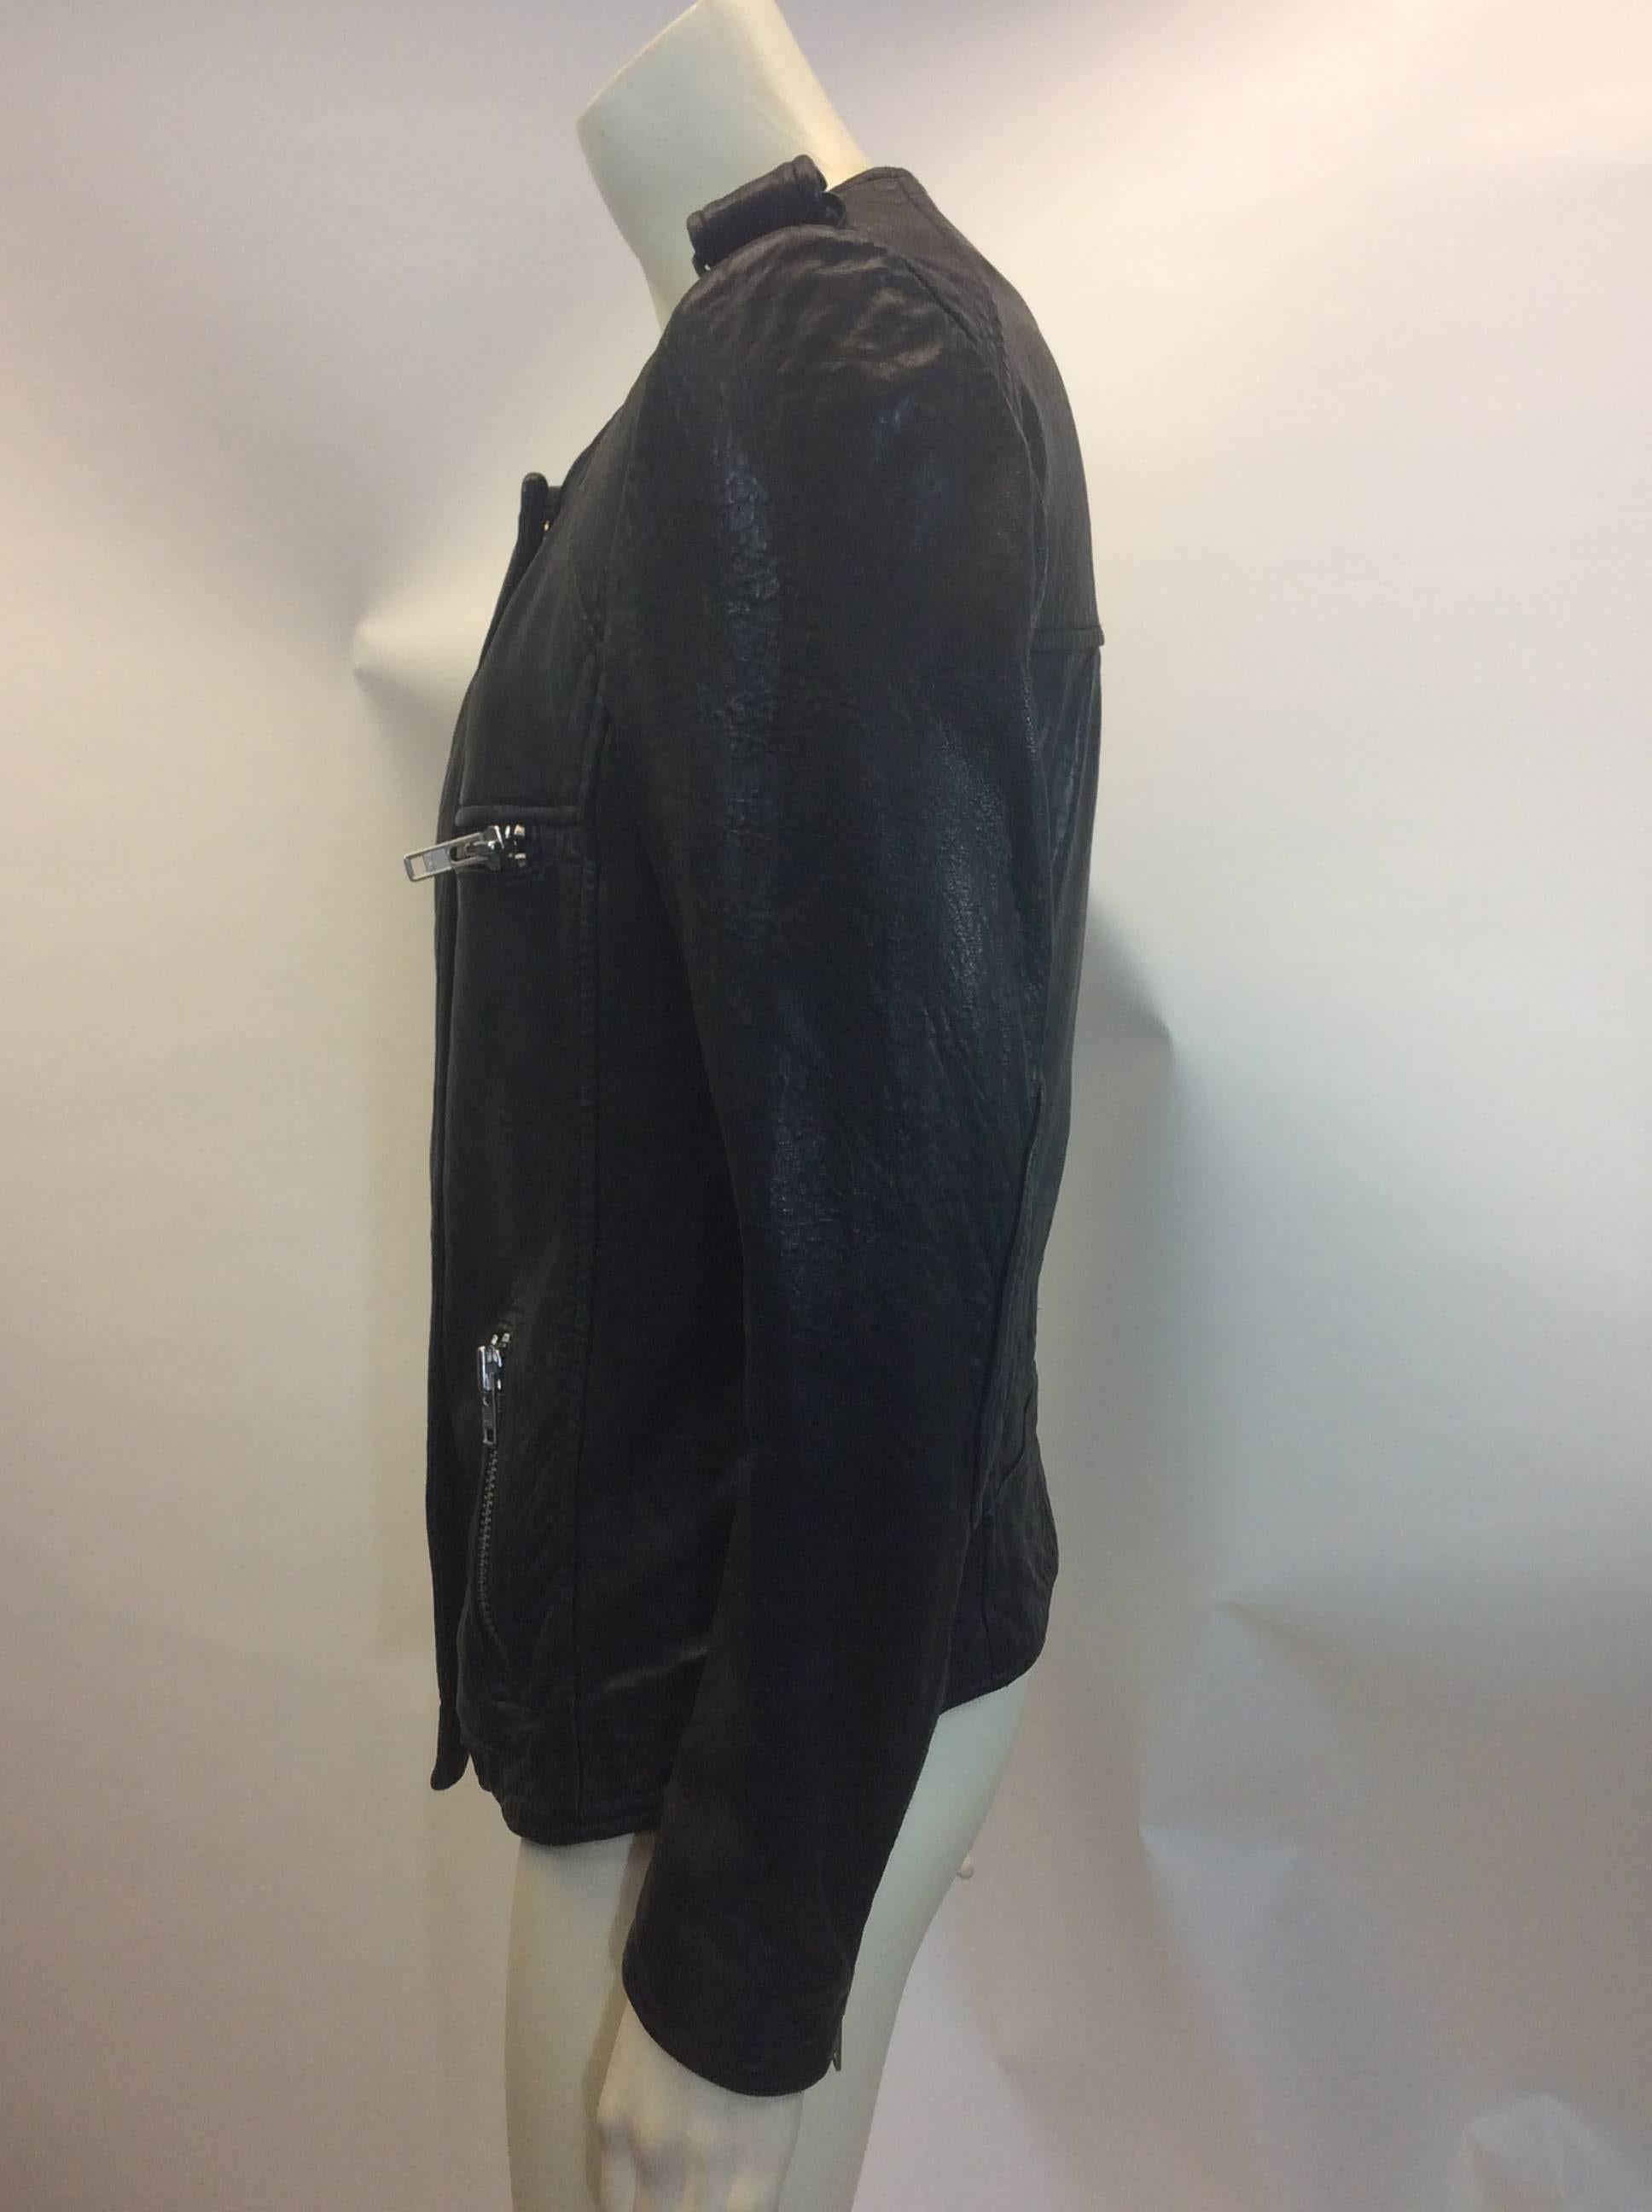 Isabel Marant Leather Moto Jacket  In Excellent Condition For Sale In Narberth, PA